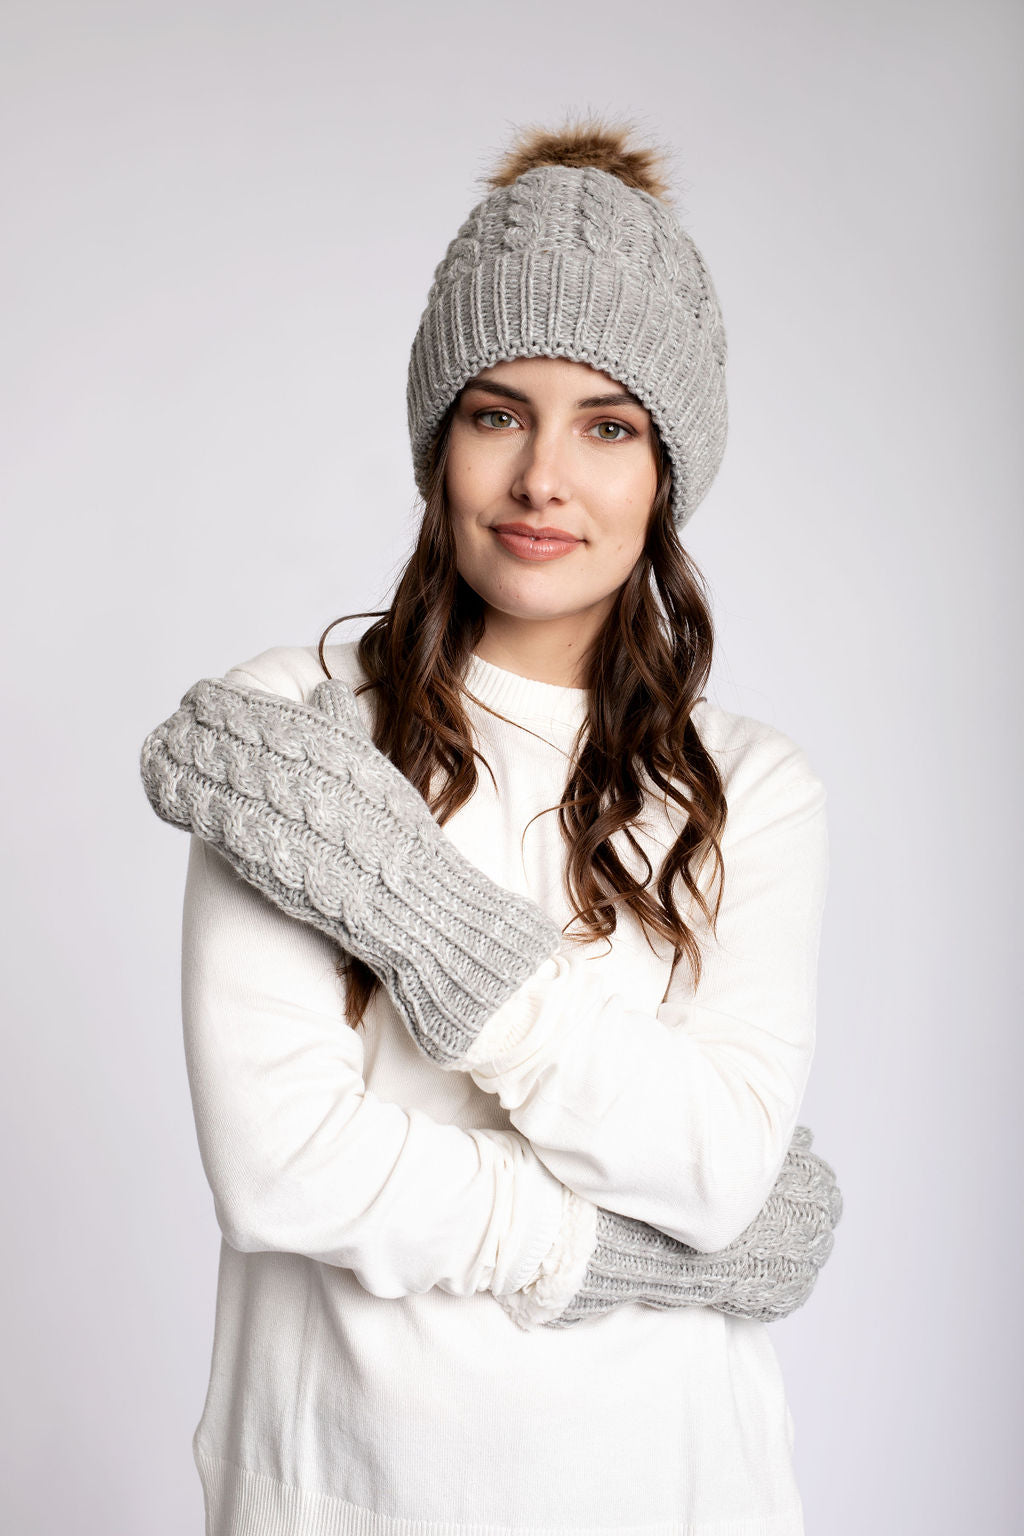 Just Cozy Knit Mittens - Comfy and Cozy Lined Mittens